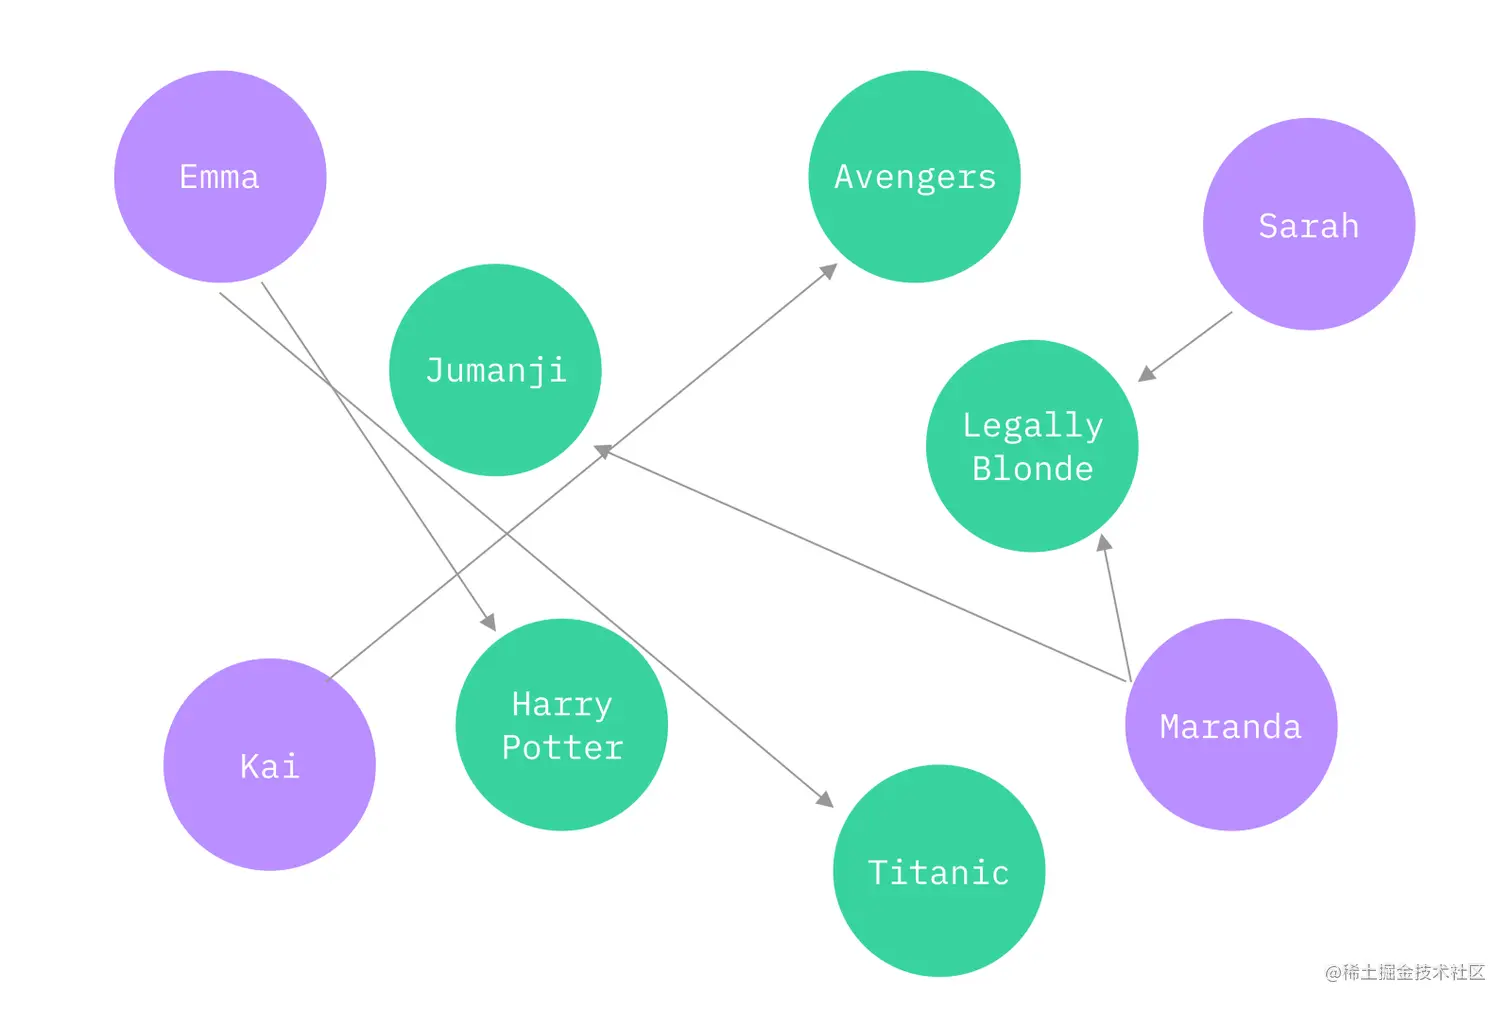 directed_graph